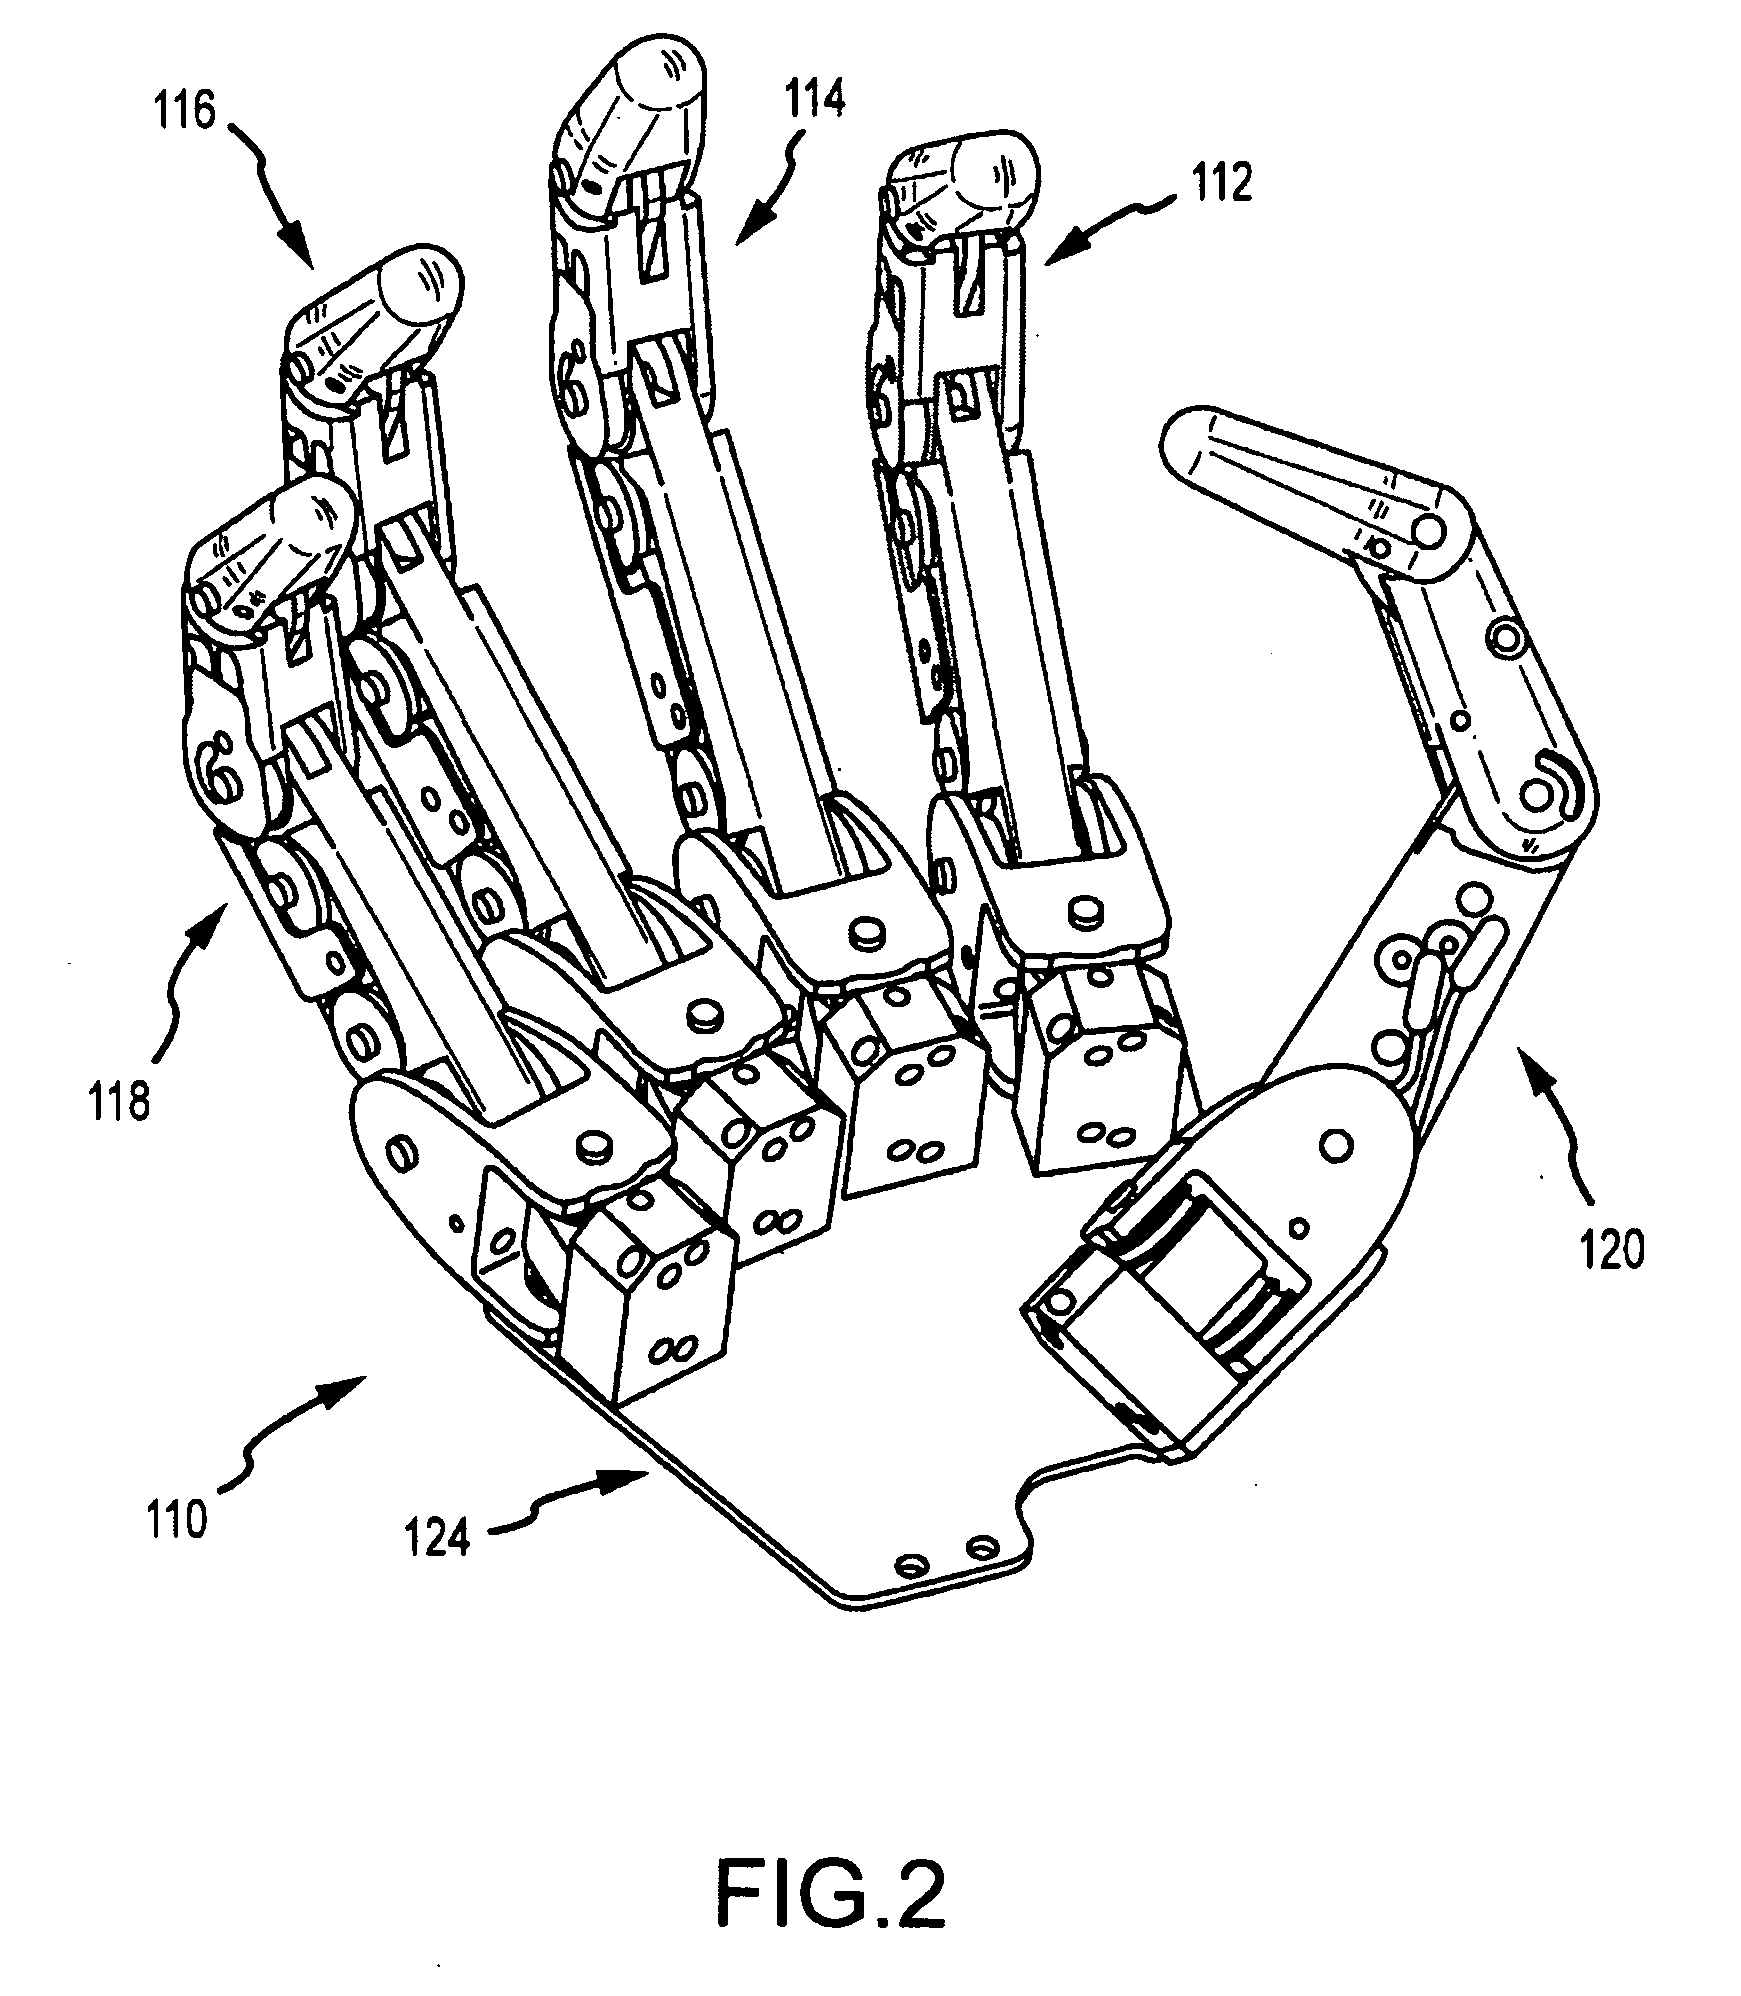 Robot hand with human-like fingers